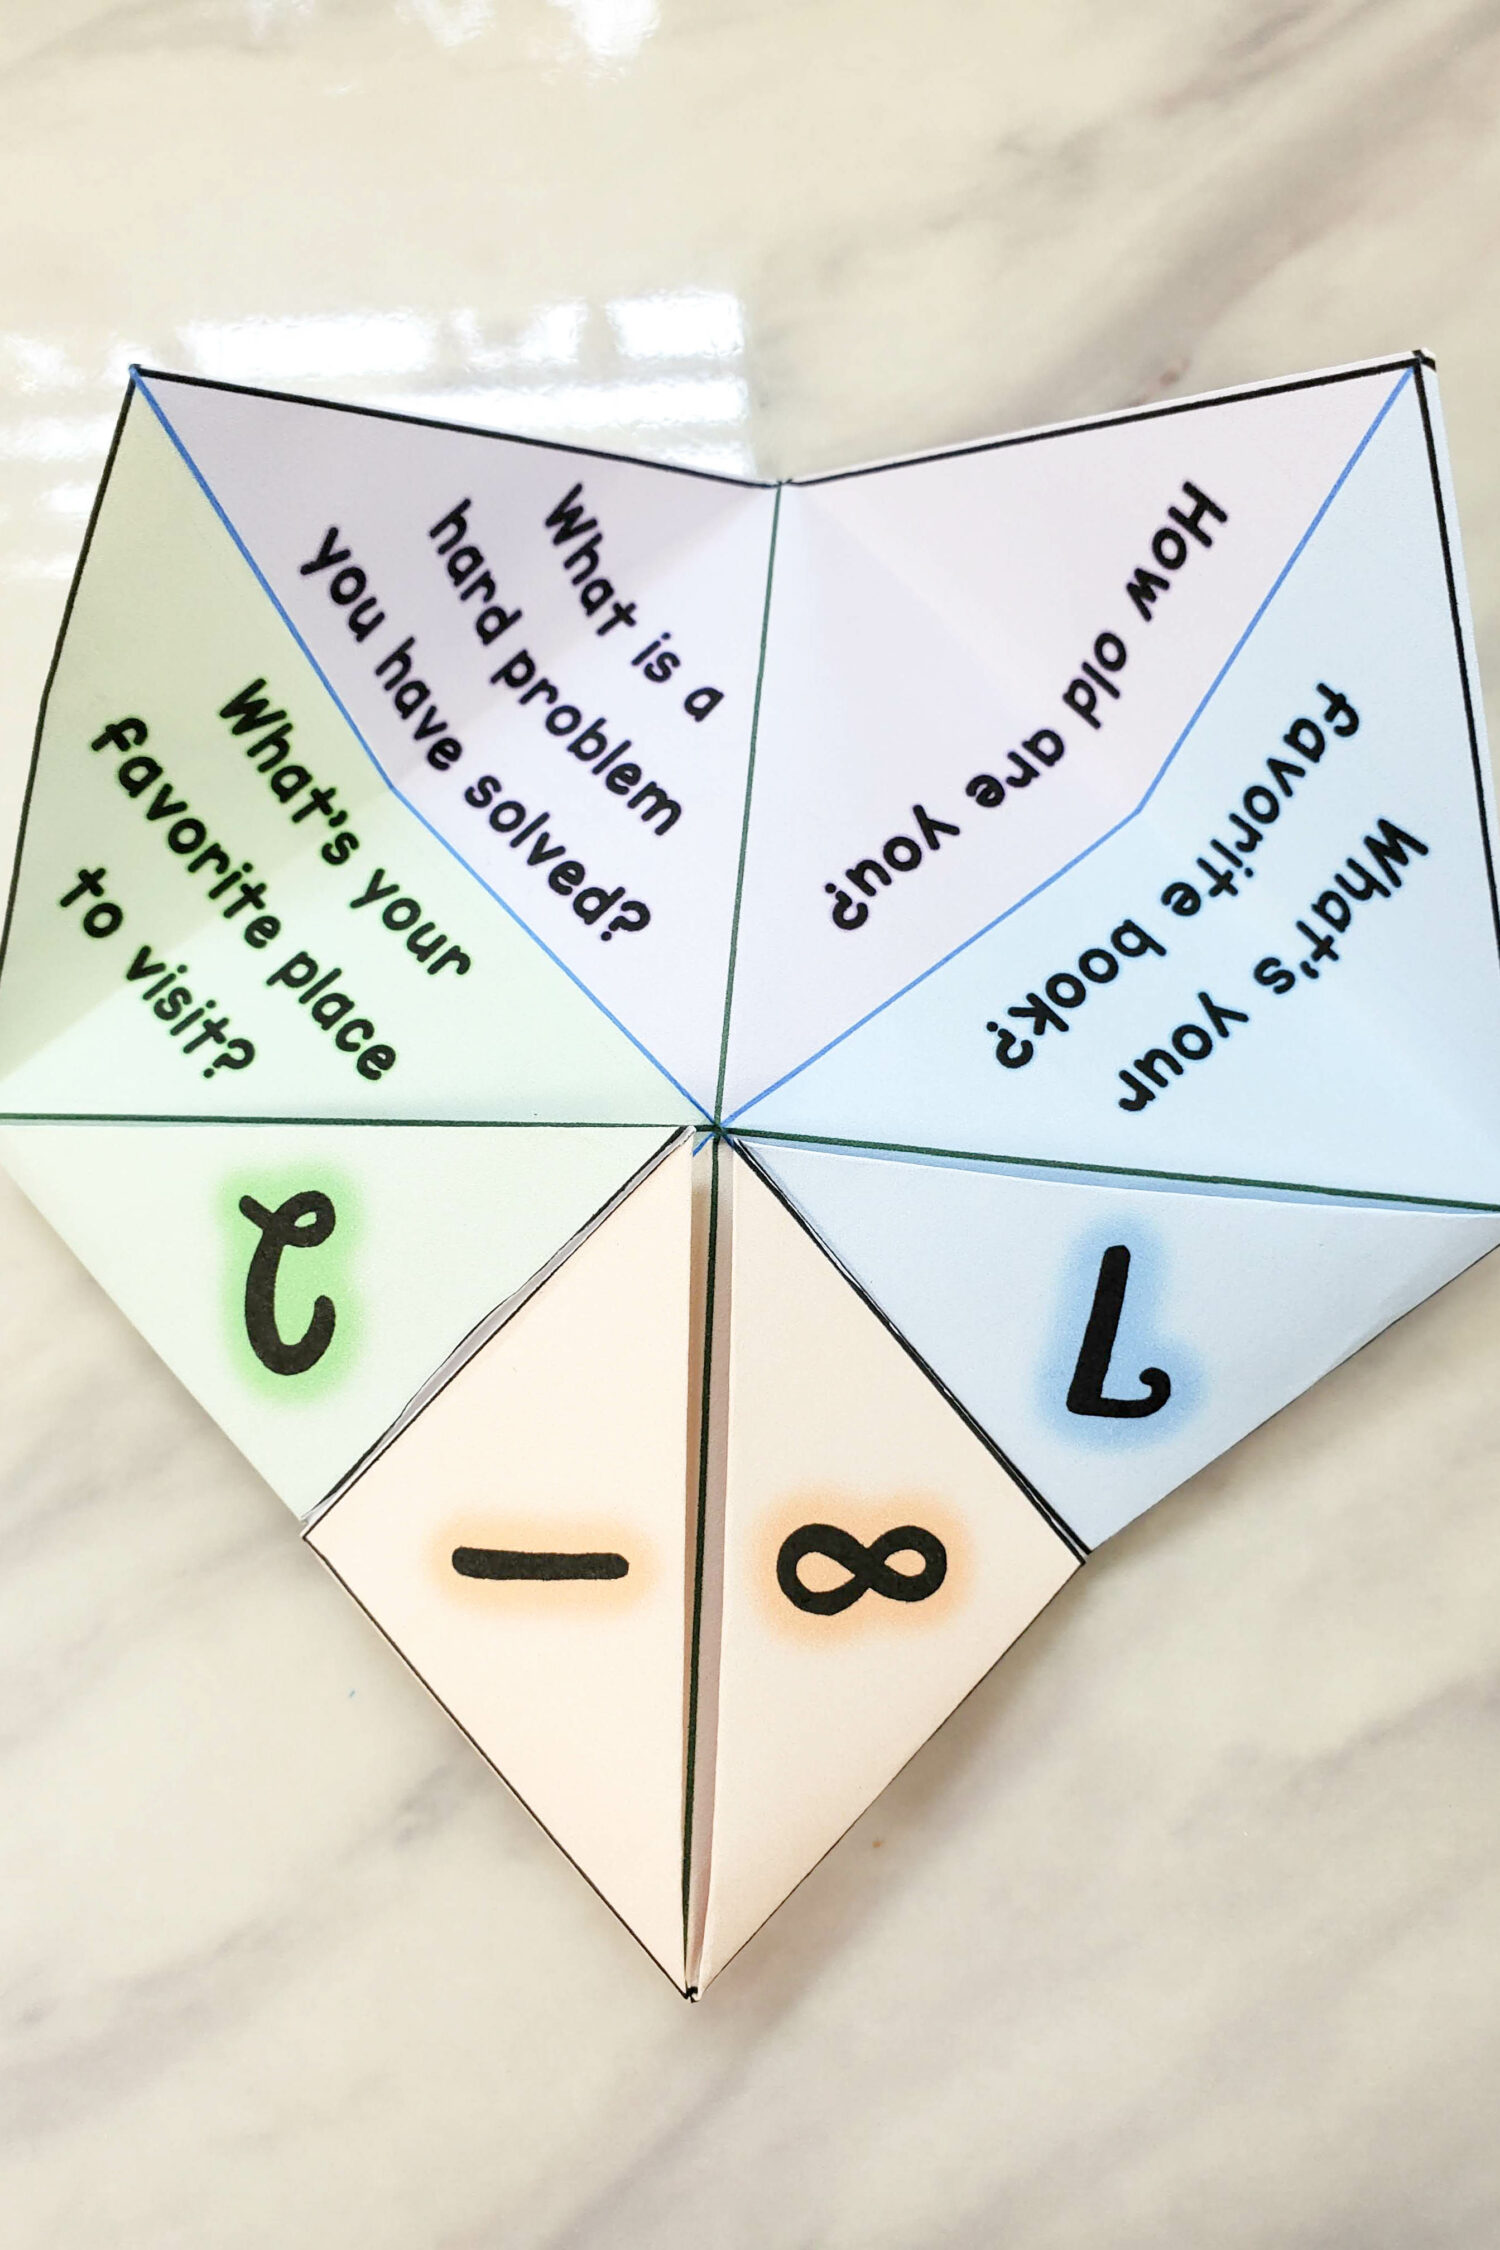 Back to School Cootie Catcher1 Getting to Know You singing time activity! Use this fun fortune teller printable to pick a favorite subject and answer a getting to know you question! Great activity for Primary music leaders.